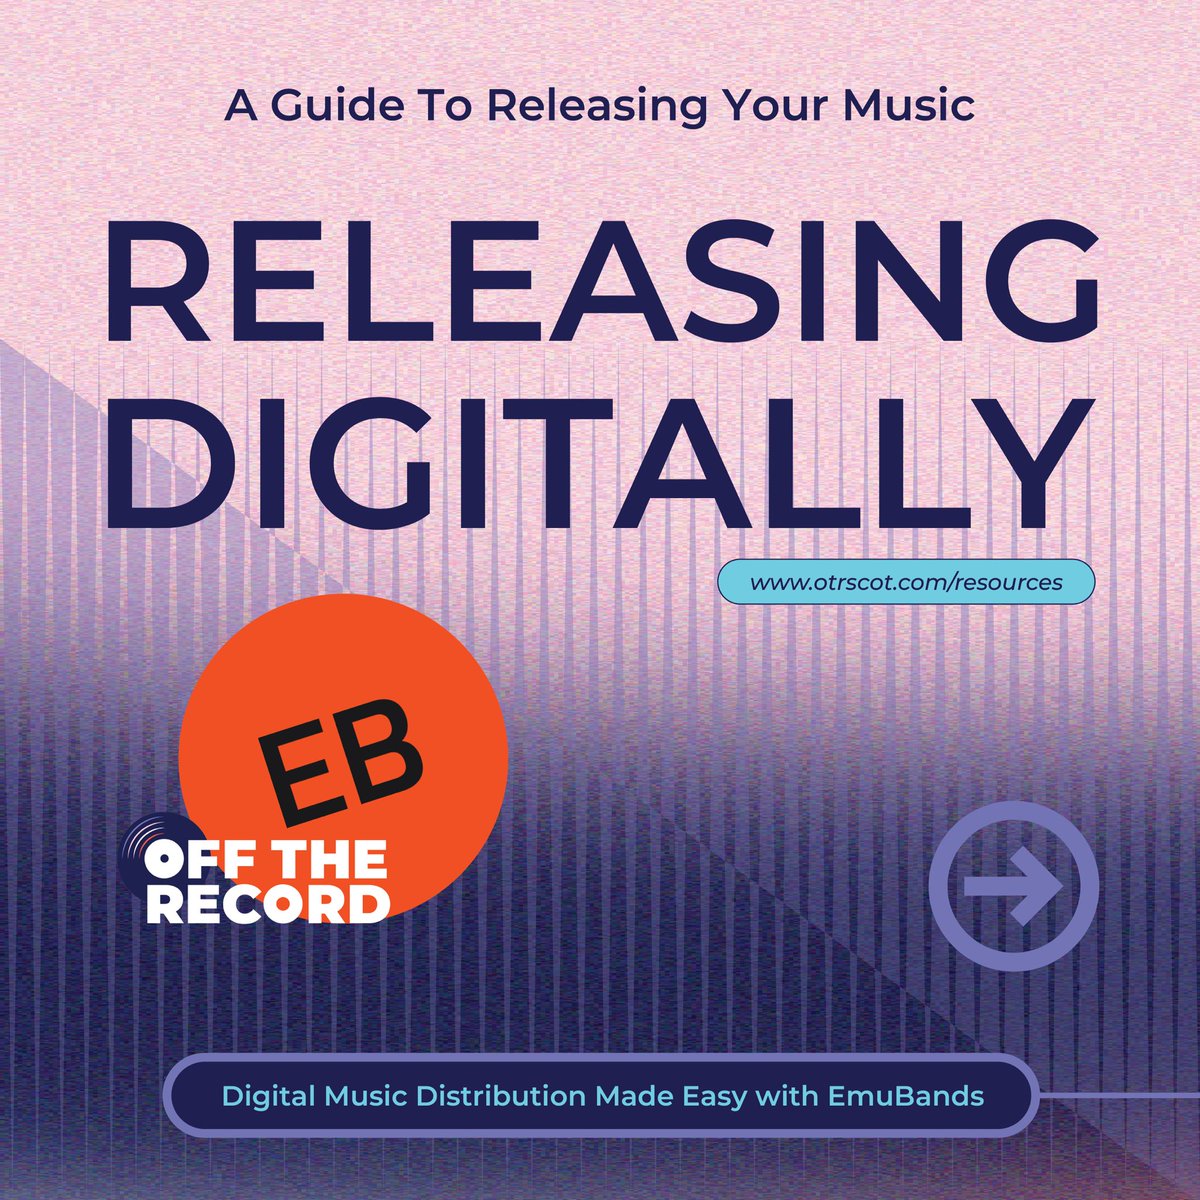 A Guide To Releasing Your Music: Releasing Digitally 📲 Starting with Digital Music Distribution Made Easy, presented by Toni Malyn (@EmuBands)⚡️ otrscot.com/resources